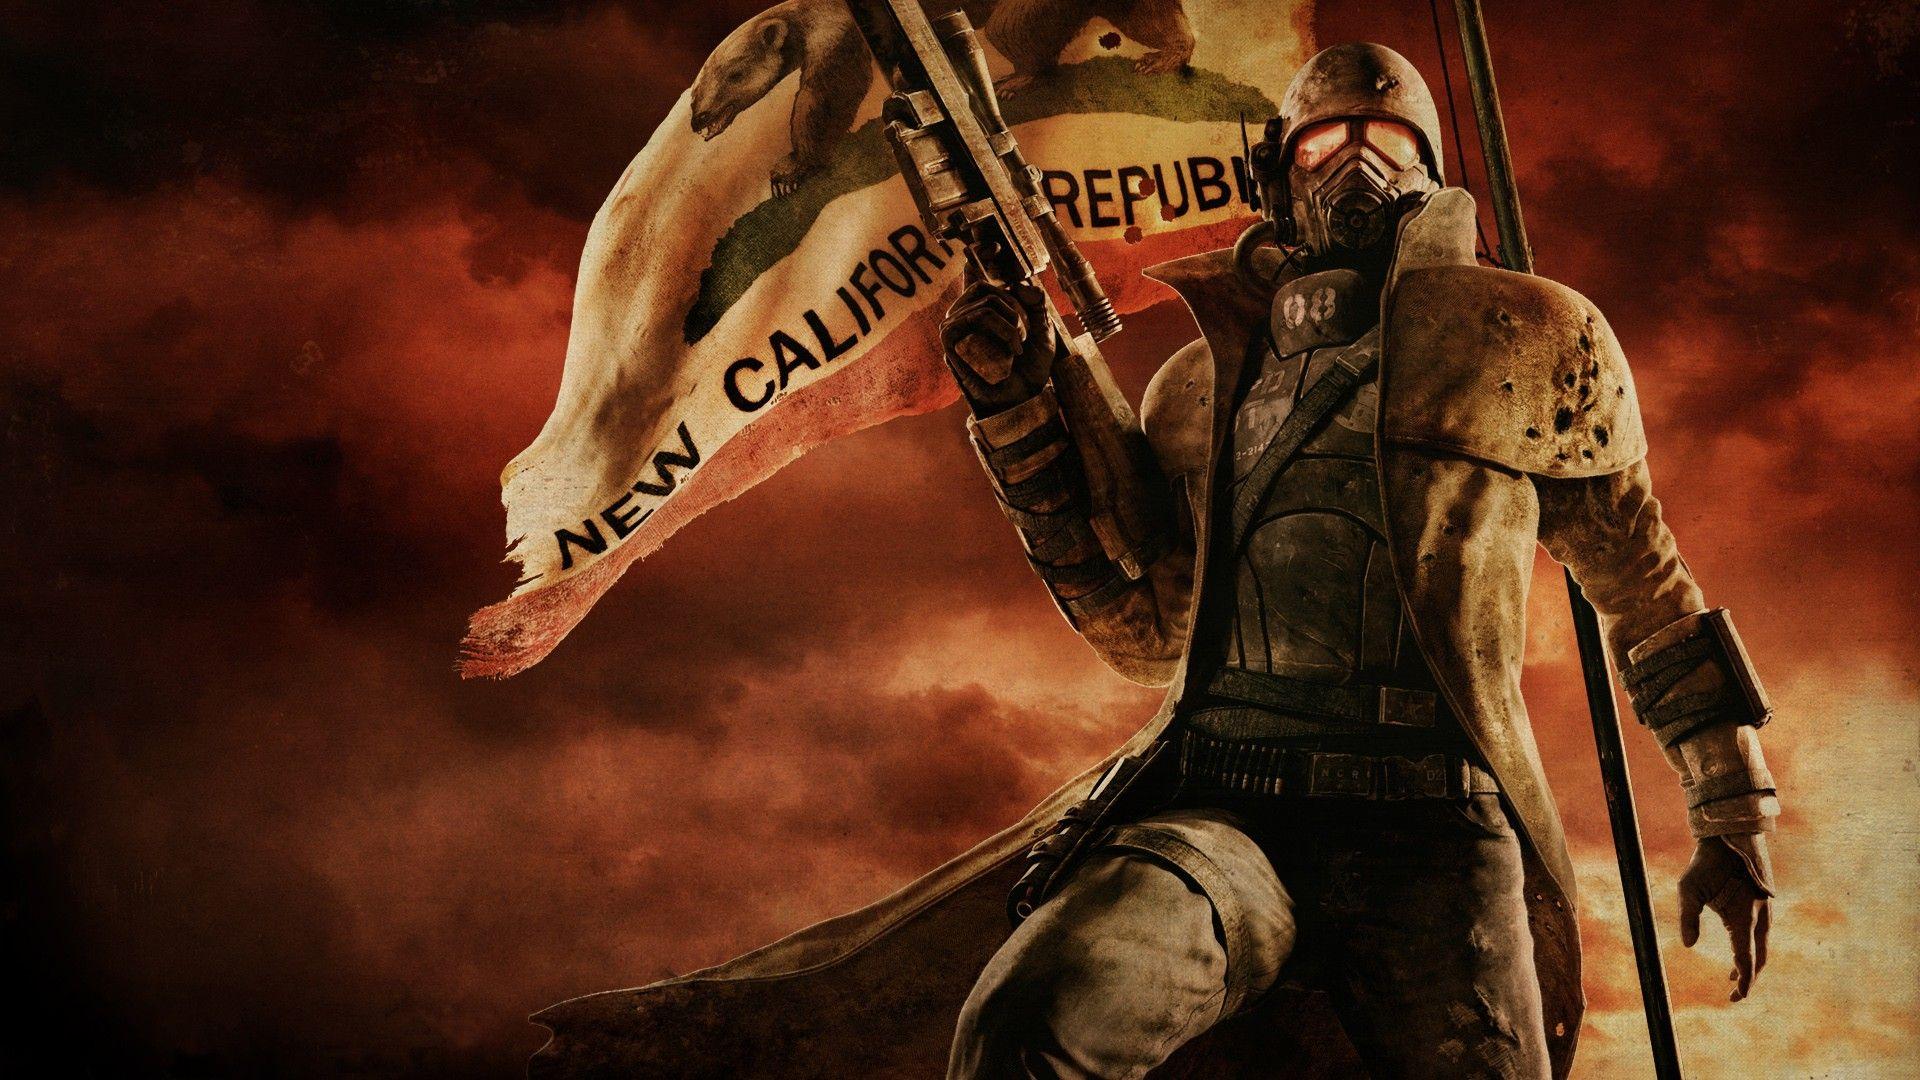 Fallout, Fallout New Vegas, NCR, Rangers, Snipers Wallpaper HD